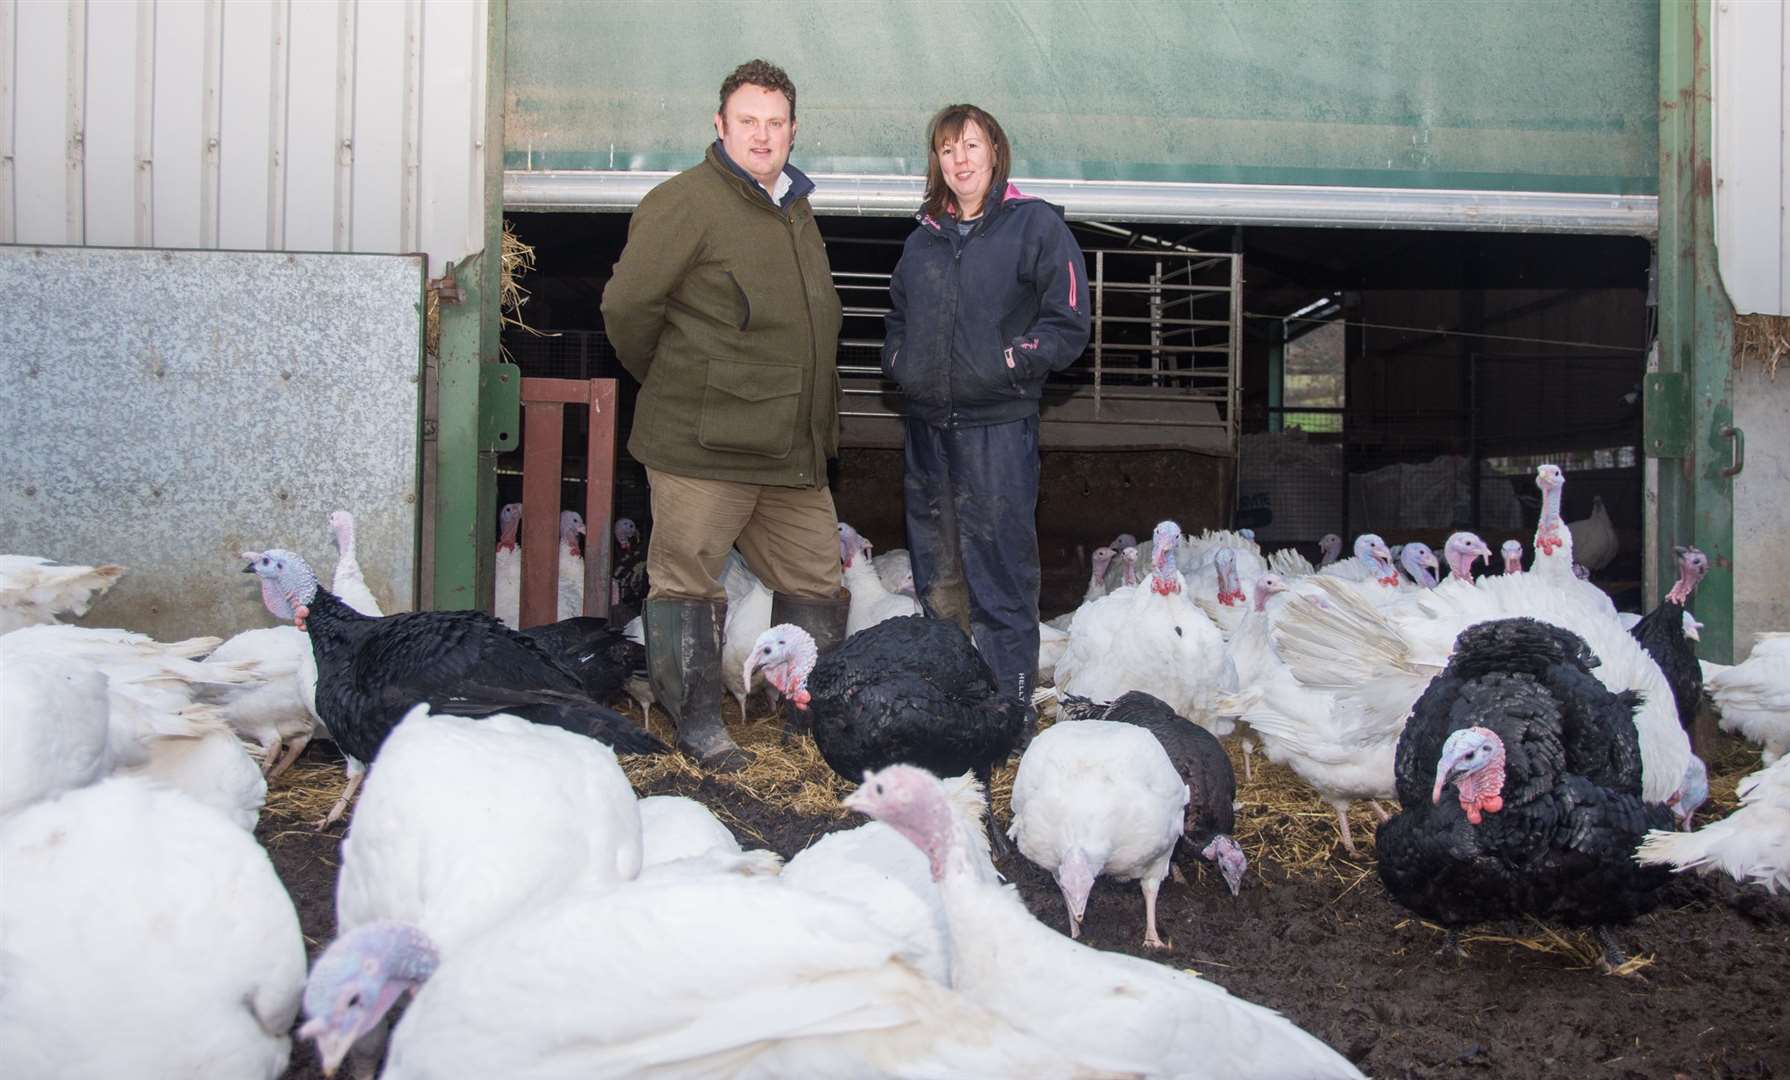 Ross and Kirsty Williams at Tullochbeg Farm have been announced as the runners-up in the new entrant category at the British Farming Awards.